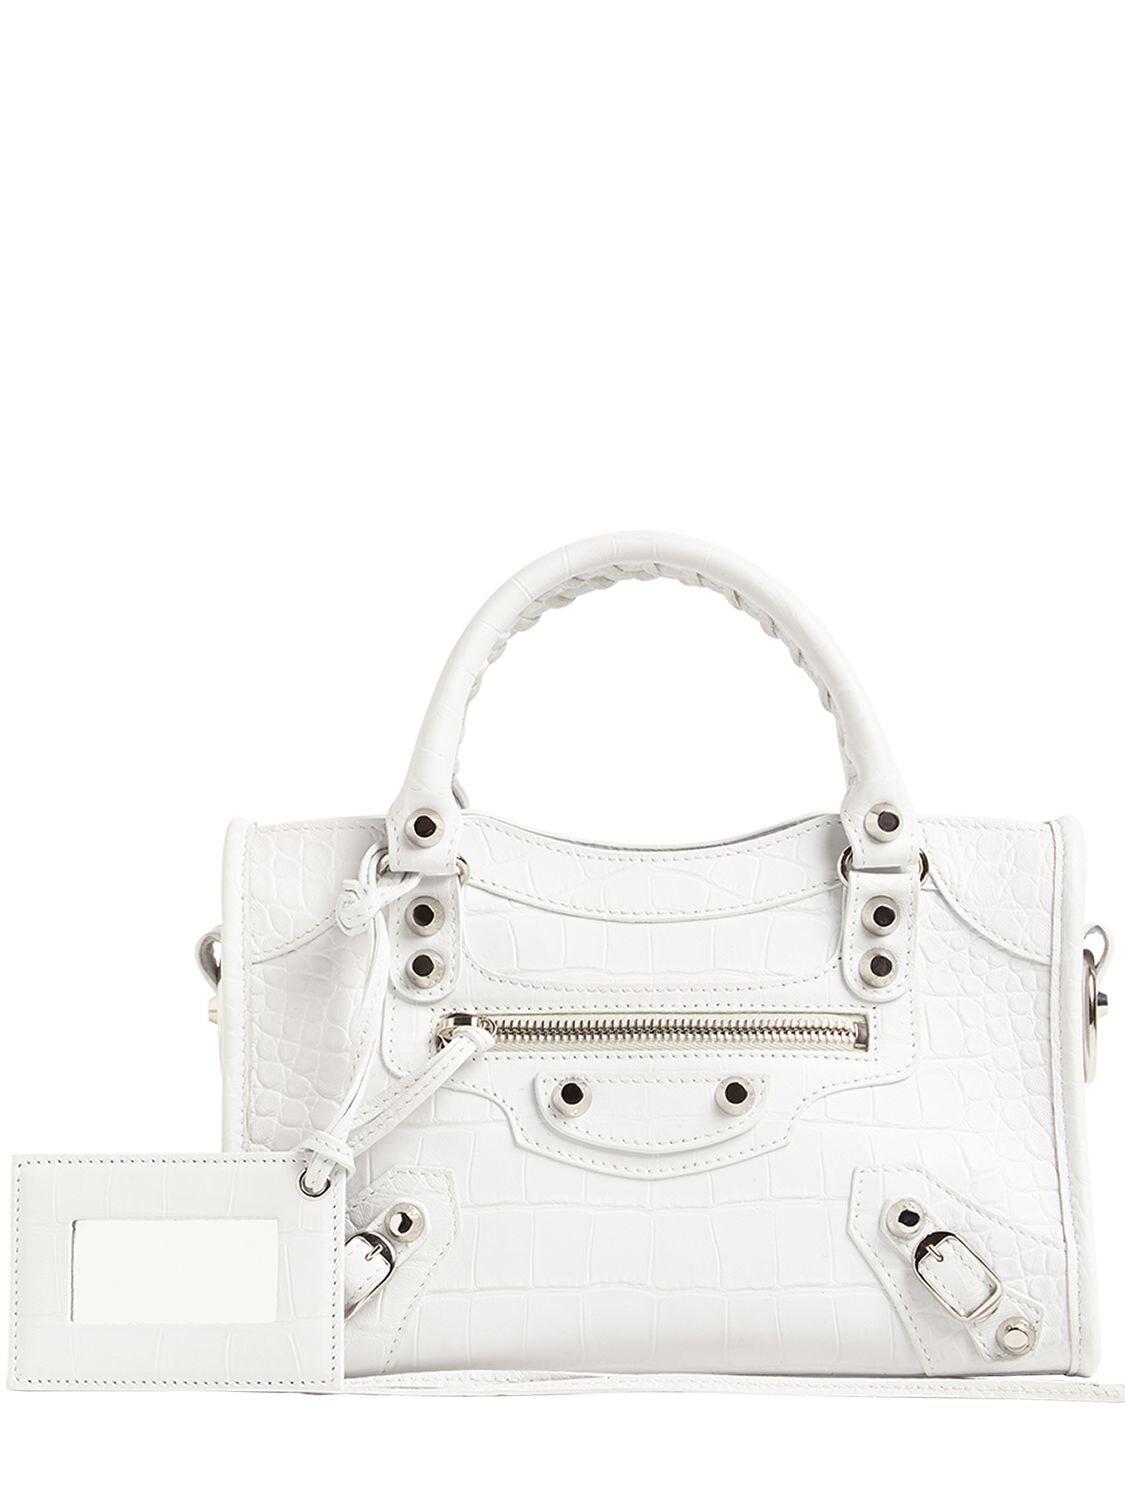 Balenciaga Mini Classic City Embossed Leather Bag in White - Save 5% - Lyst